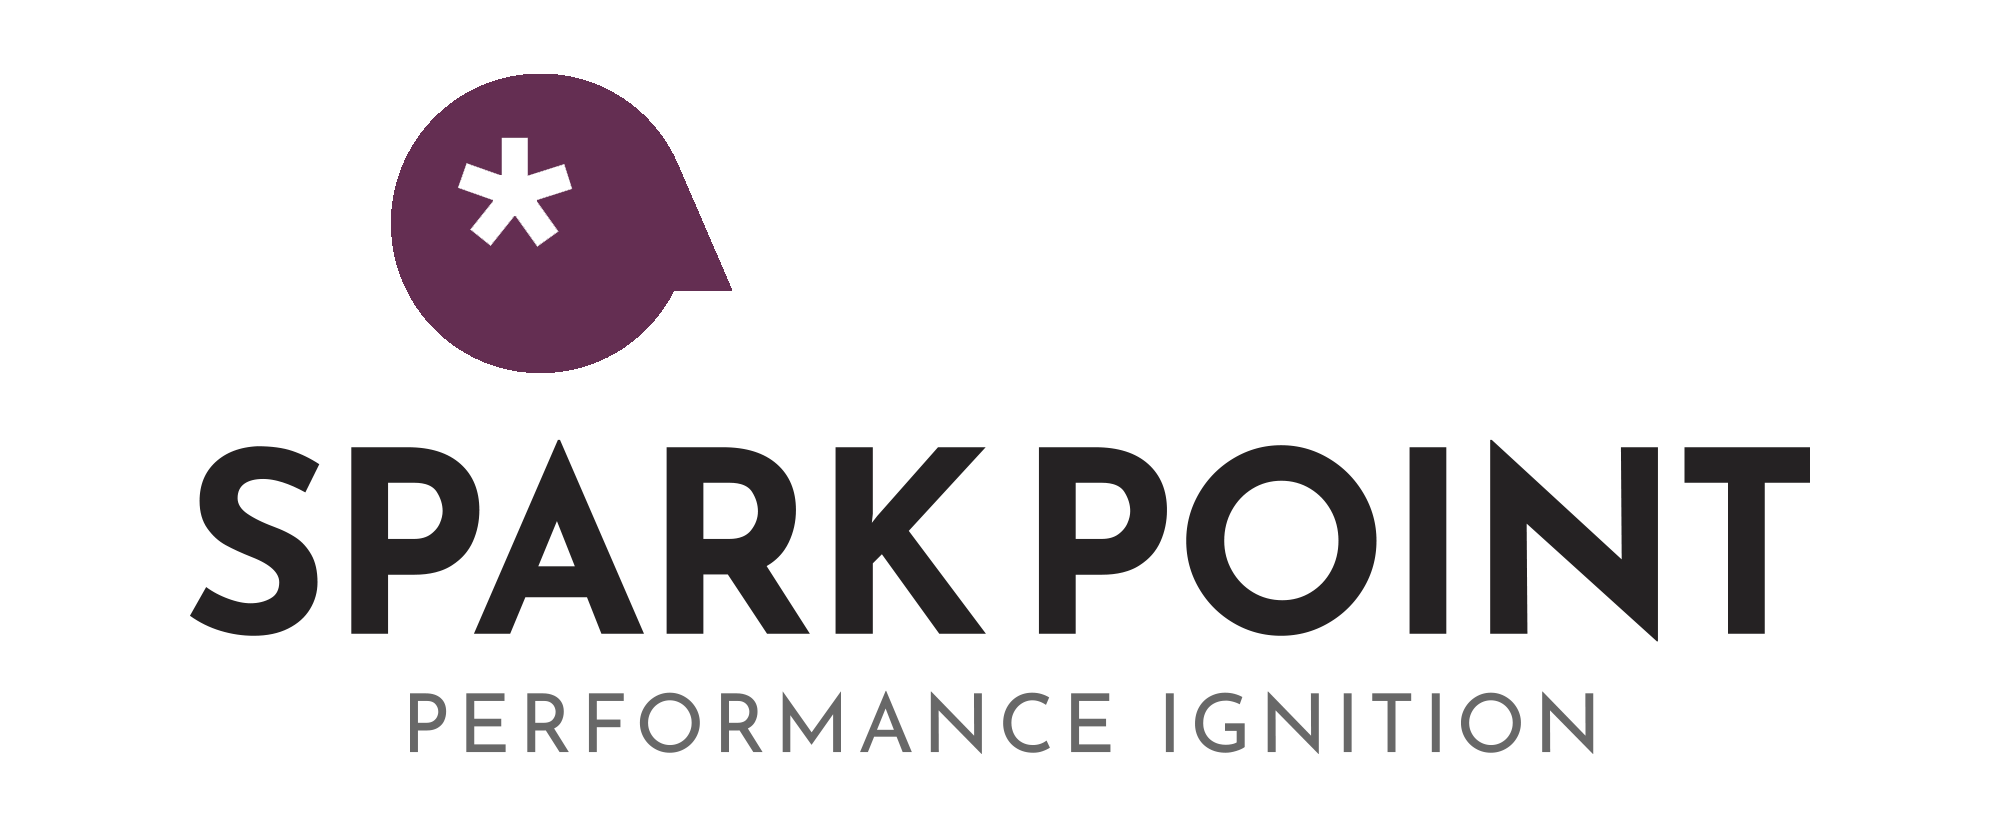 SparkPoint